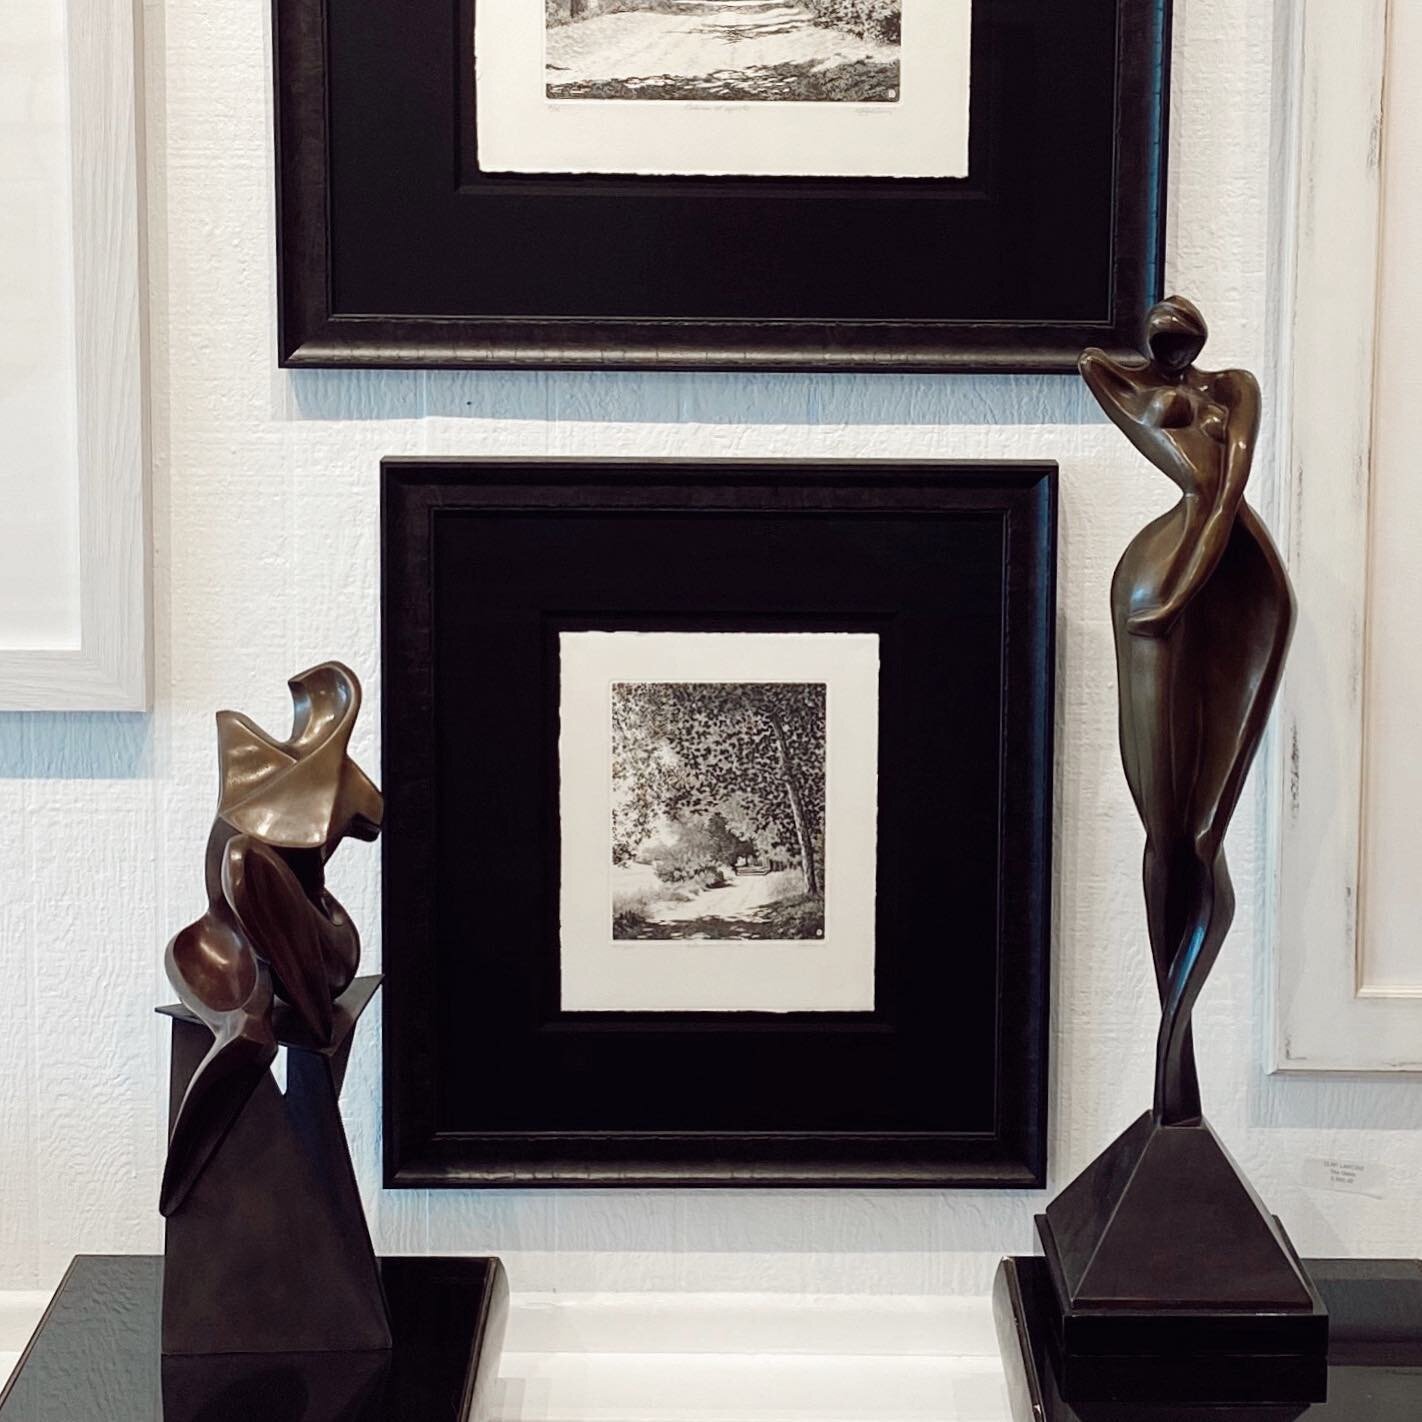 MPPL sculptures framing a mini Zaliani etching in a modern frame combination✨ 
&bull;
&bull;
&bull;
For more details &amp; purchase information please visit our website labottegagallery.com or message us directly. 
&bull;
&bull;
&bull;
&spades;️ Foll